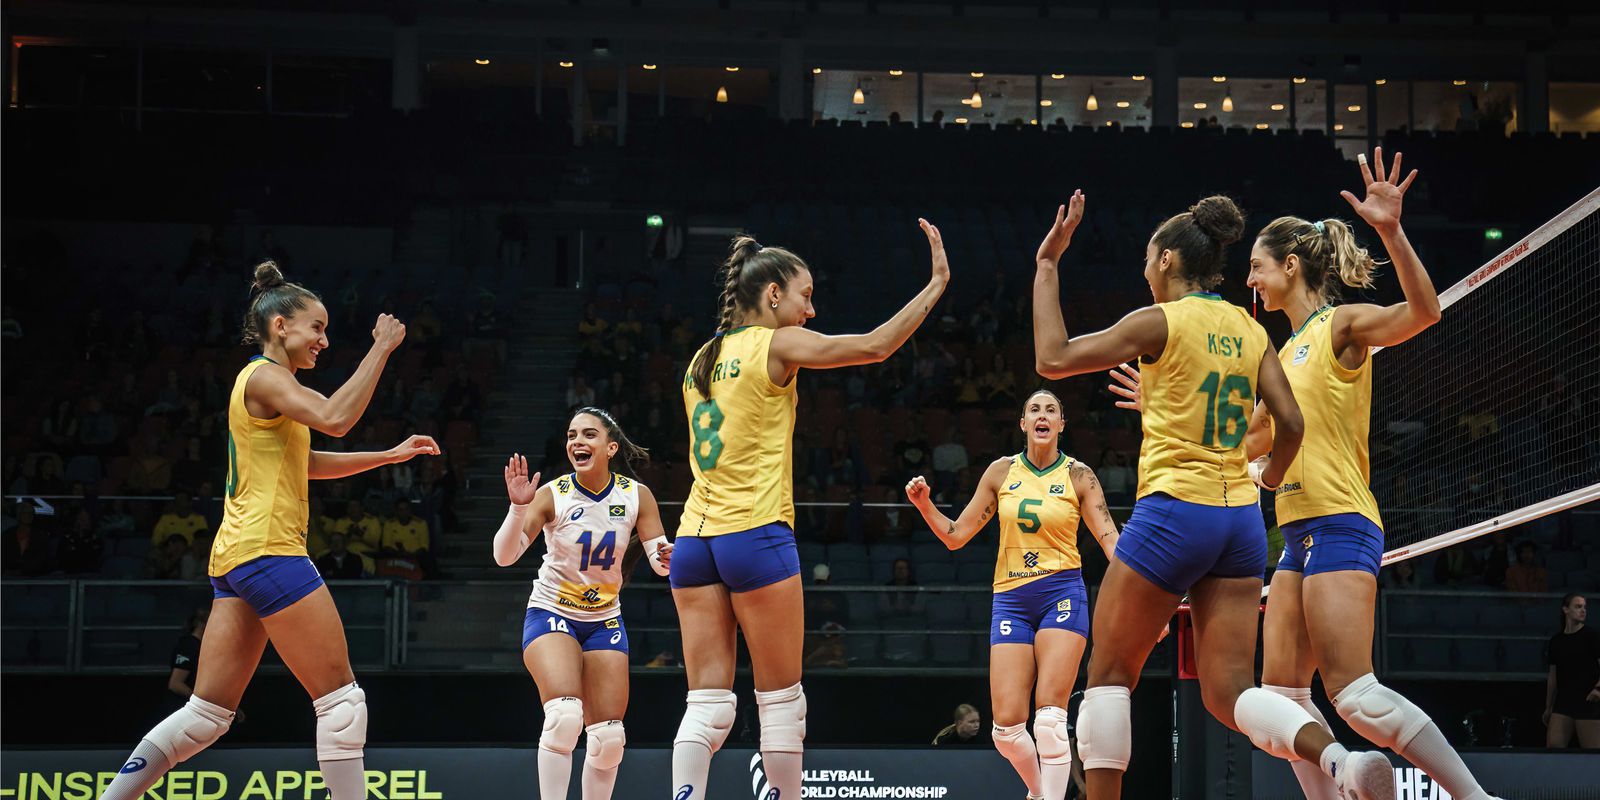 Brazil goes to the quarterfinals after defeating Belgium in the Volleyball World Cup